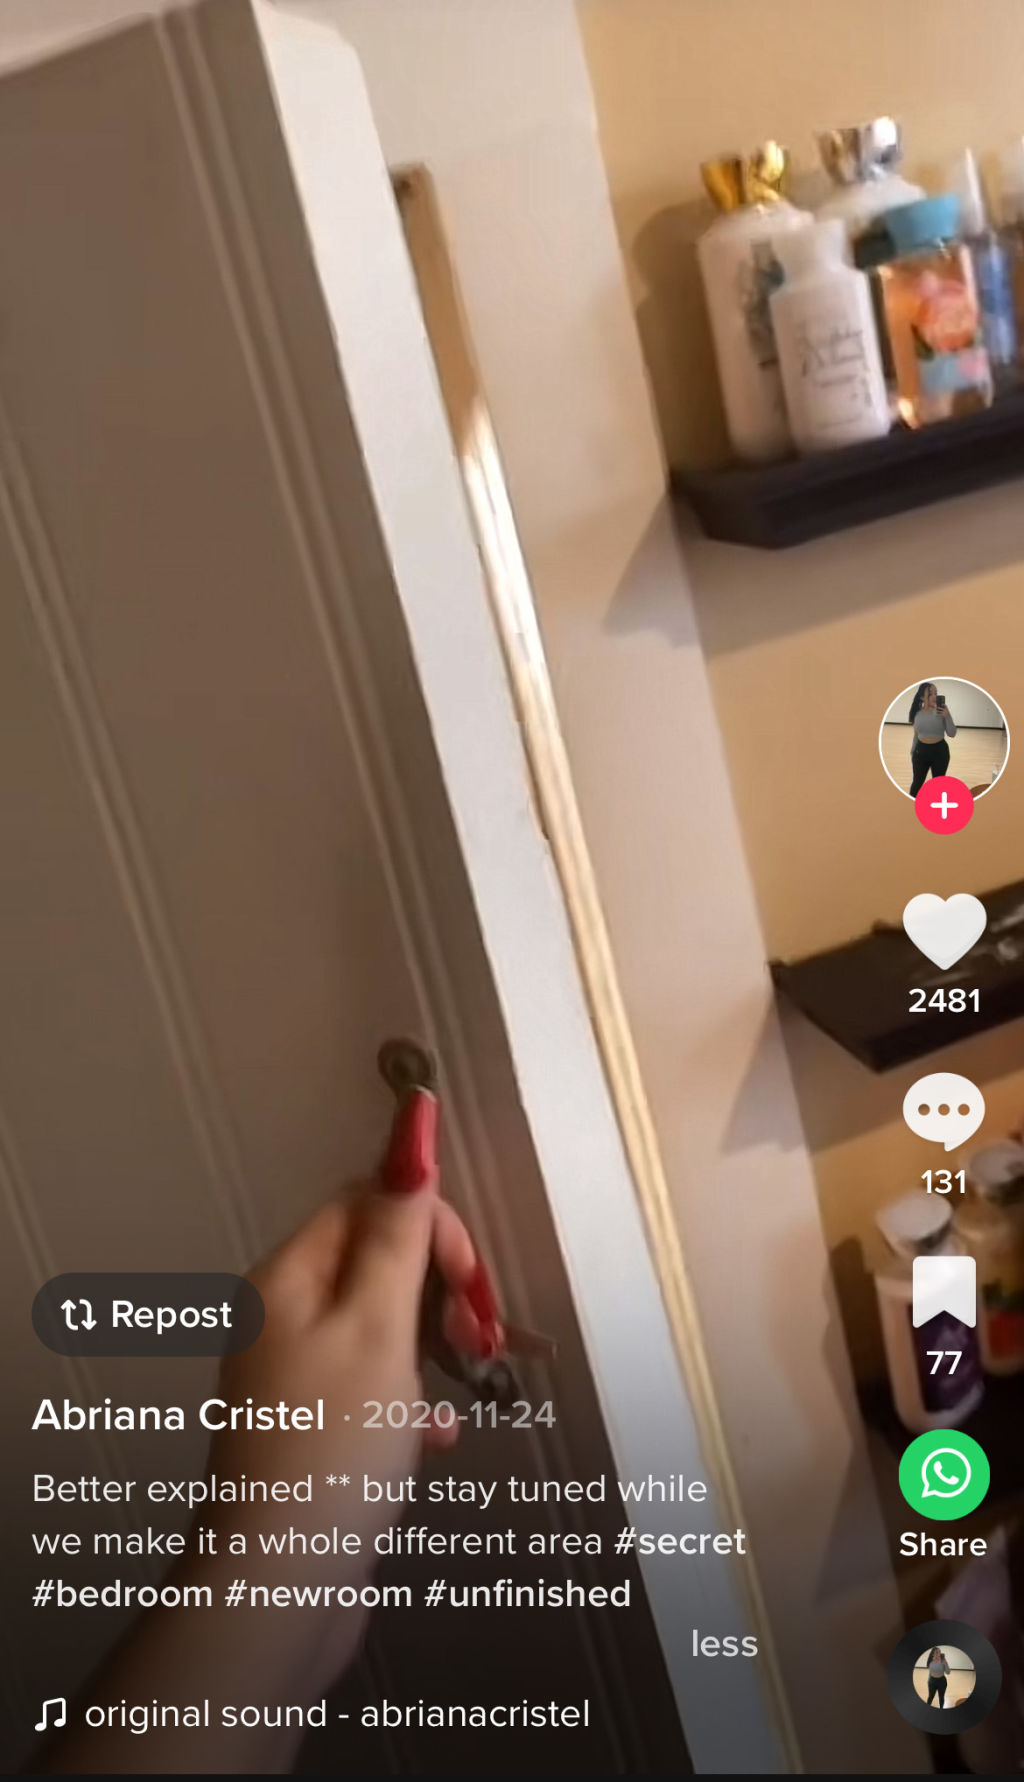 Abriana Cristel uploaded a Tiktok series on the bizarre find, behind a closet in their rental.